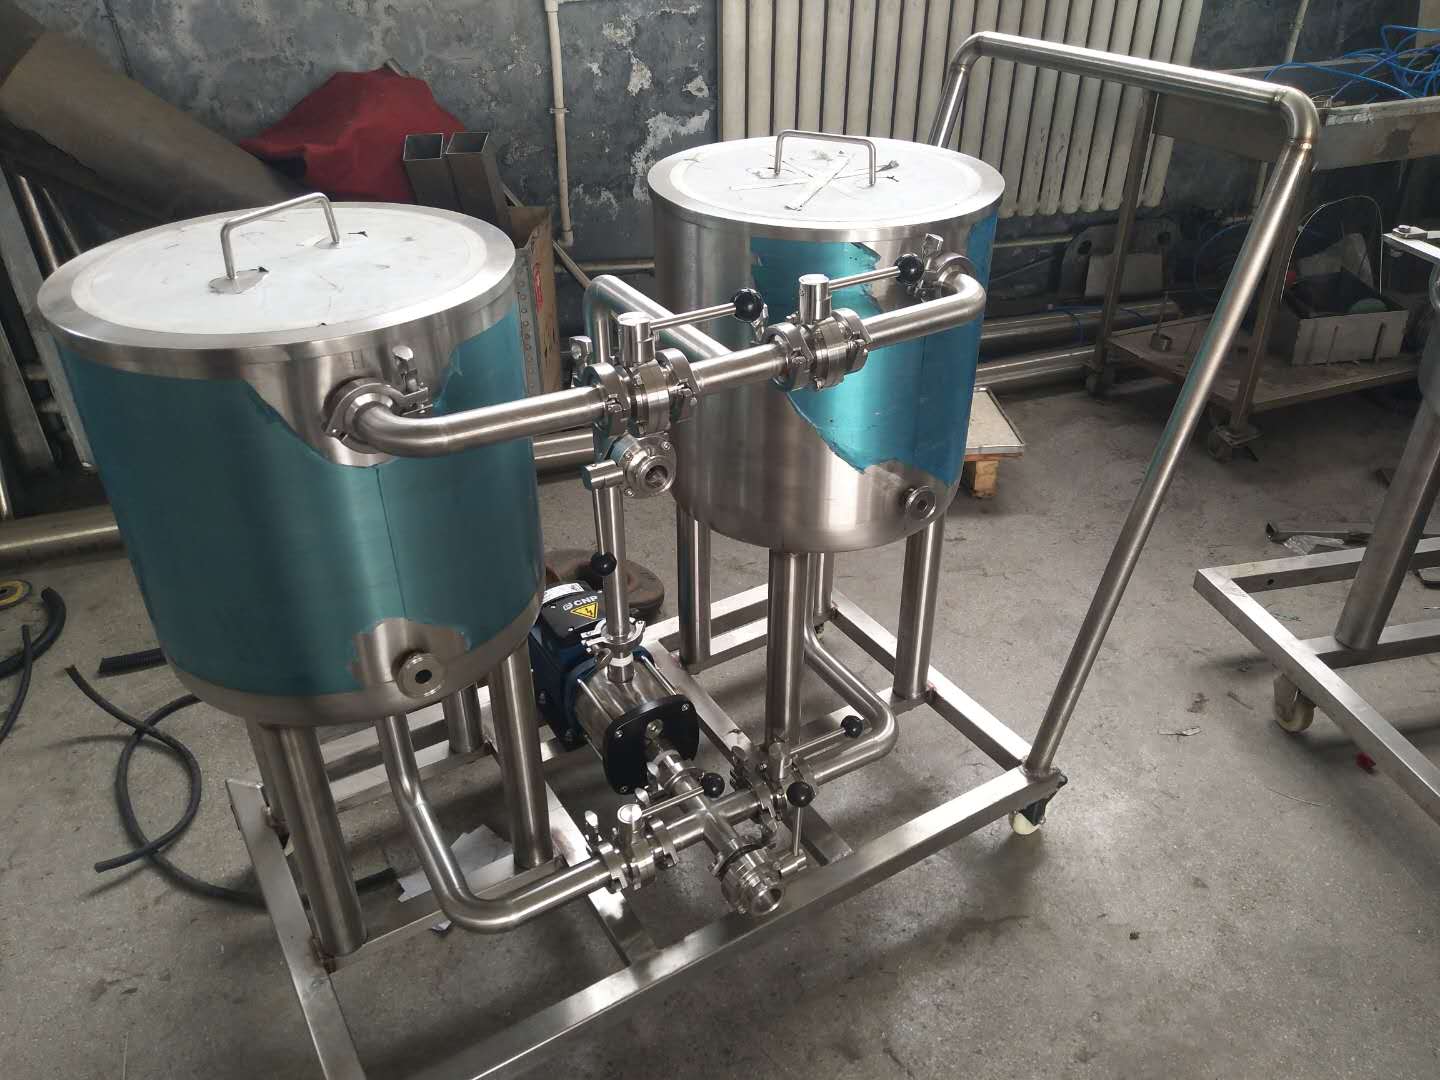 Nepal auto turnkey beer brewing equipment of SUS304 manufacturer 2020 W1